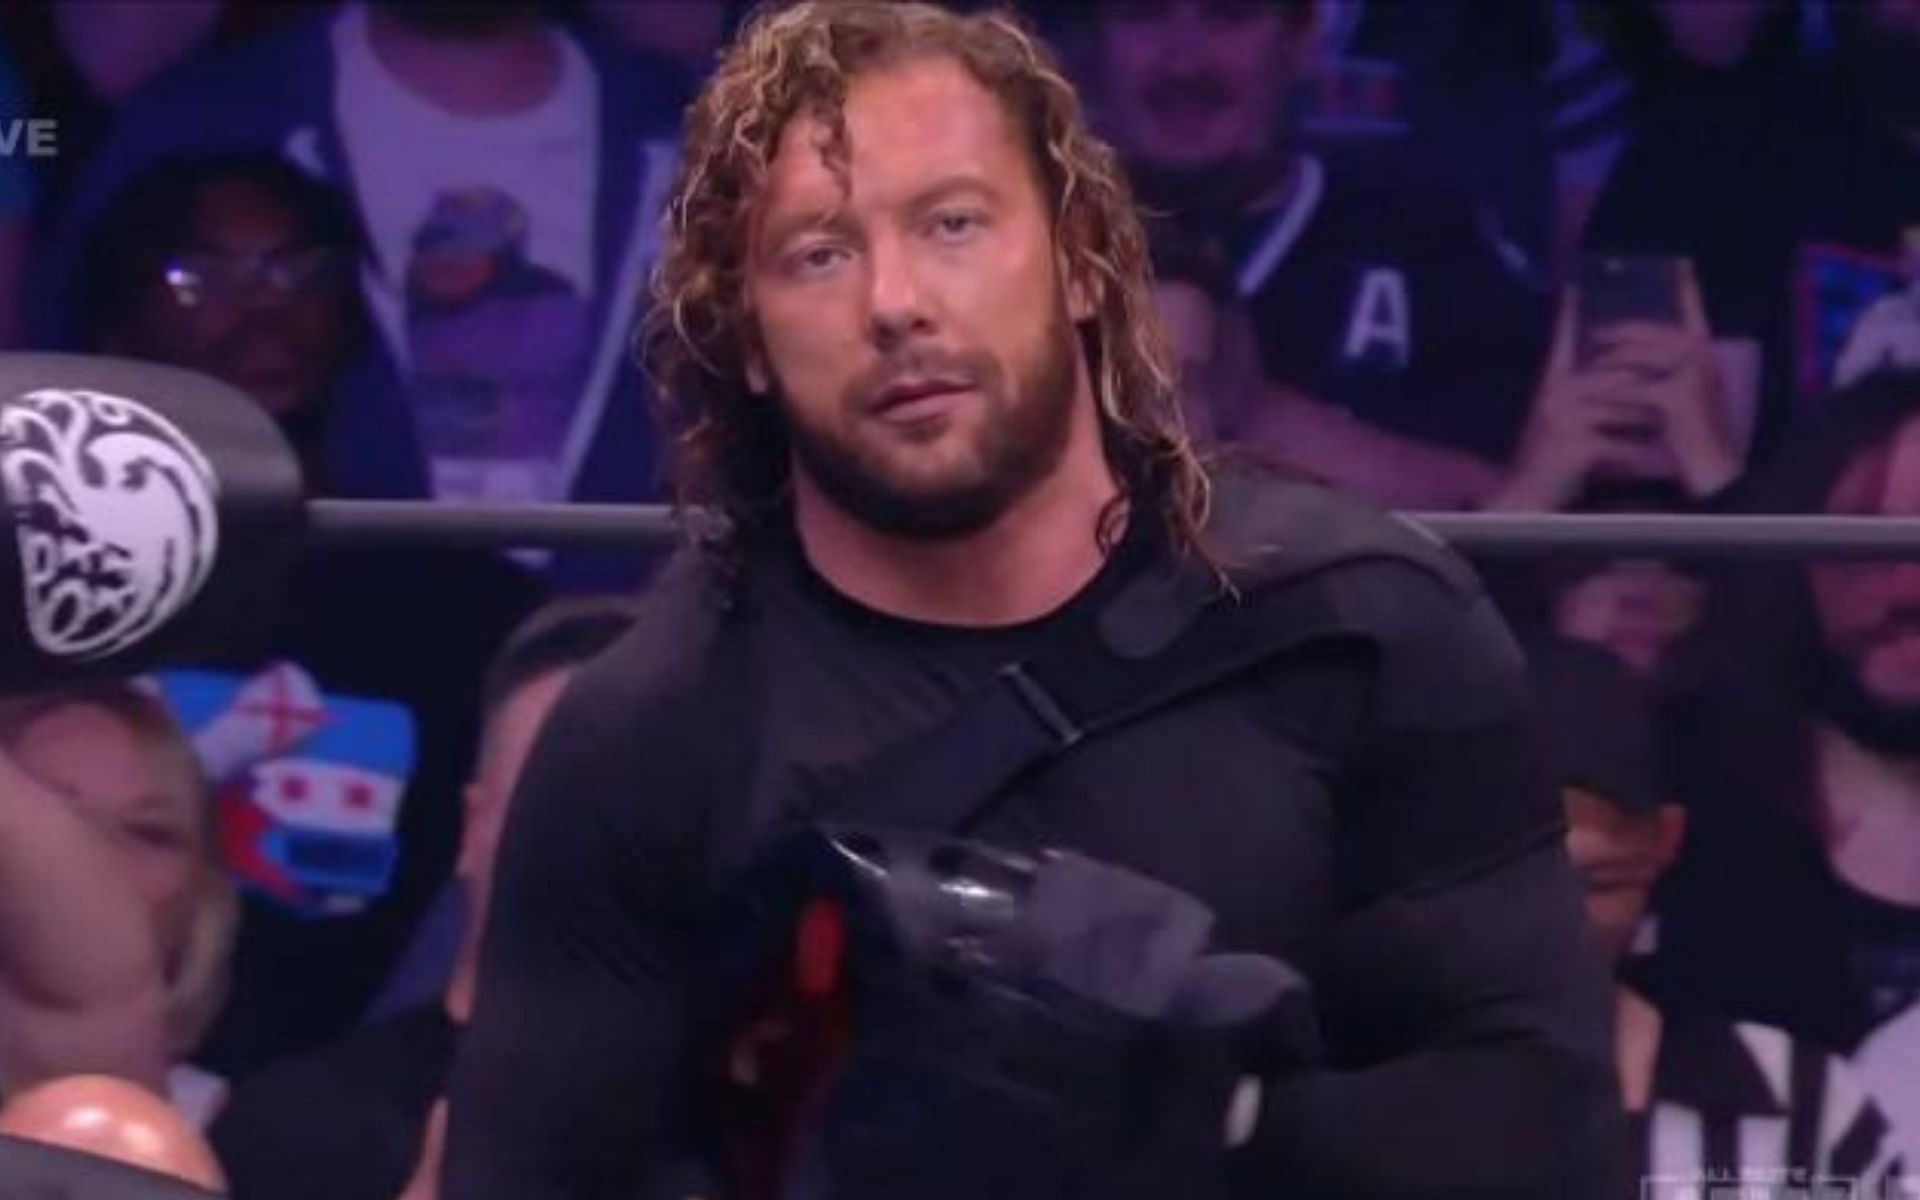 Kenny Omega returned to AEW last month